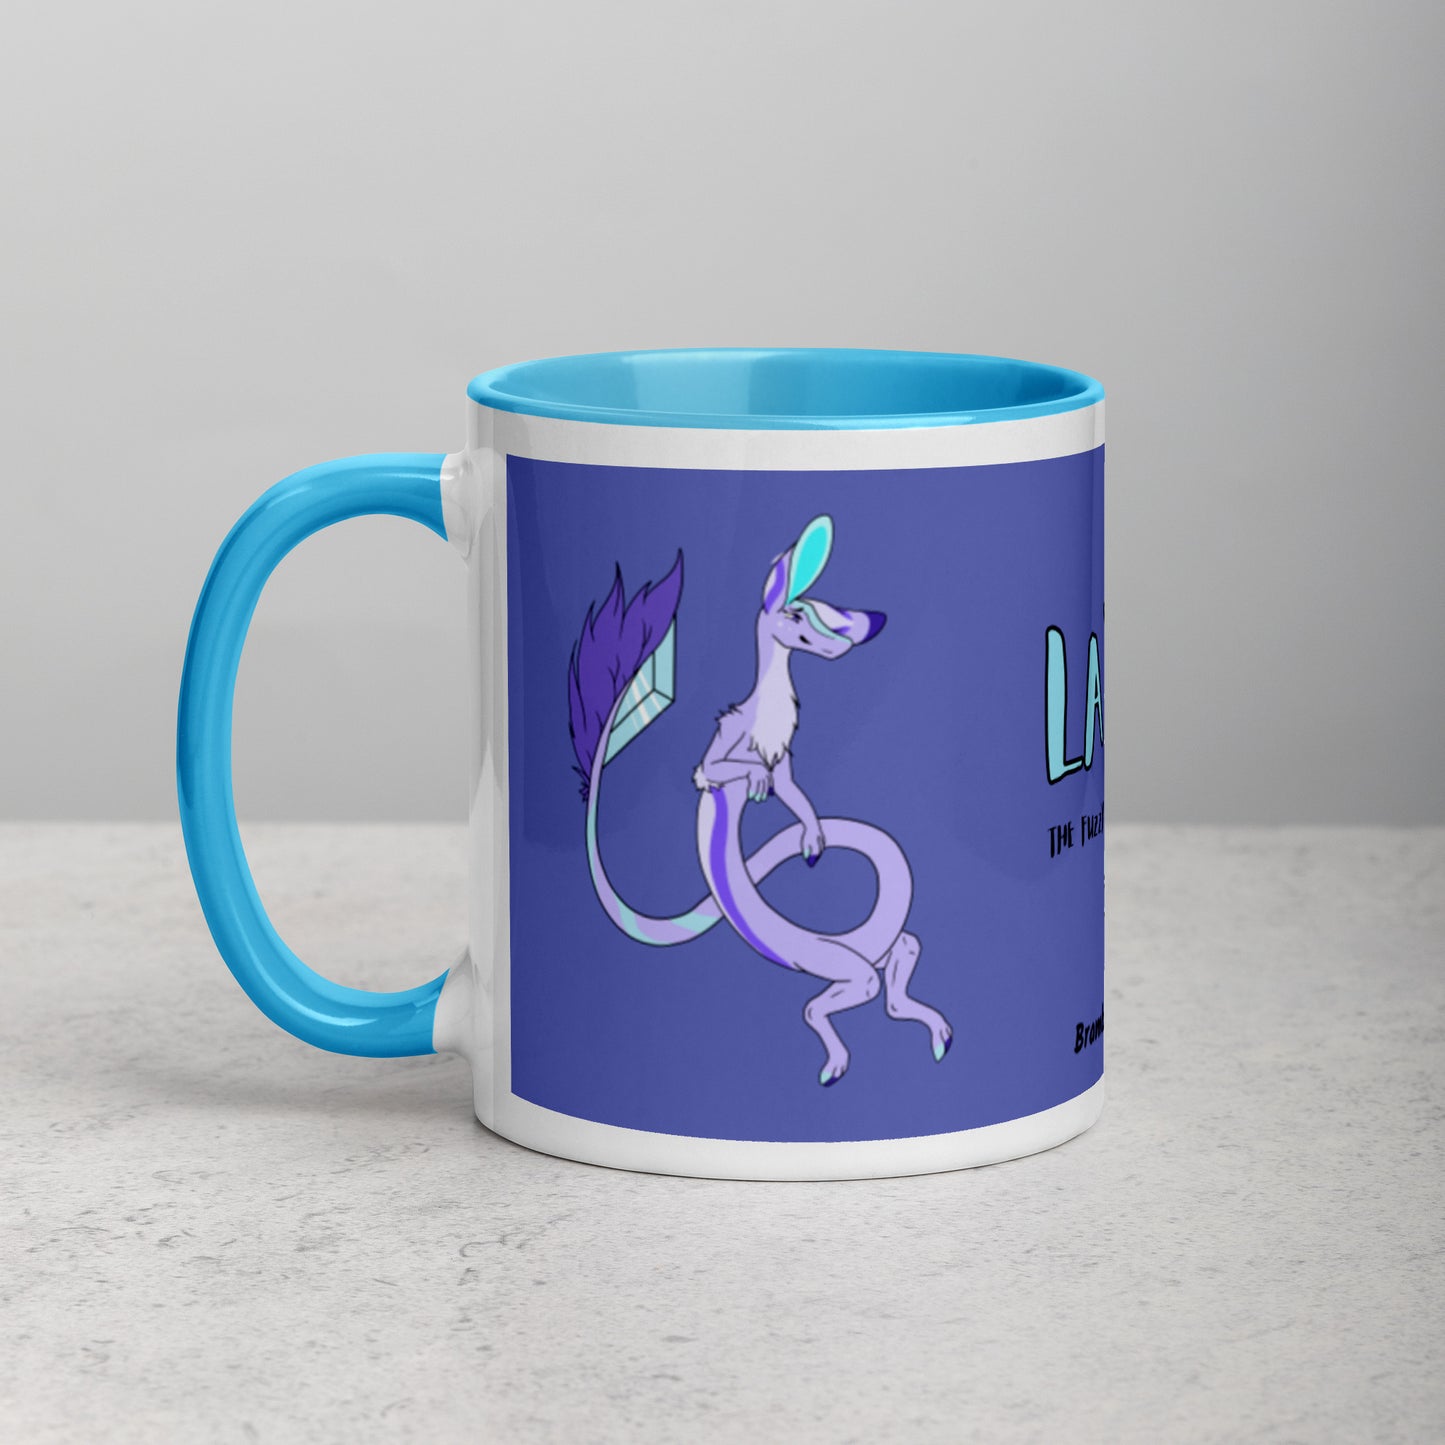 11 ounce white ceramic mug. Blue inside and handle. Features double-sided image of Layla the Lavender Fuzzy Noodle Dragon. Shown on tabletop.